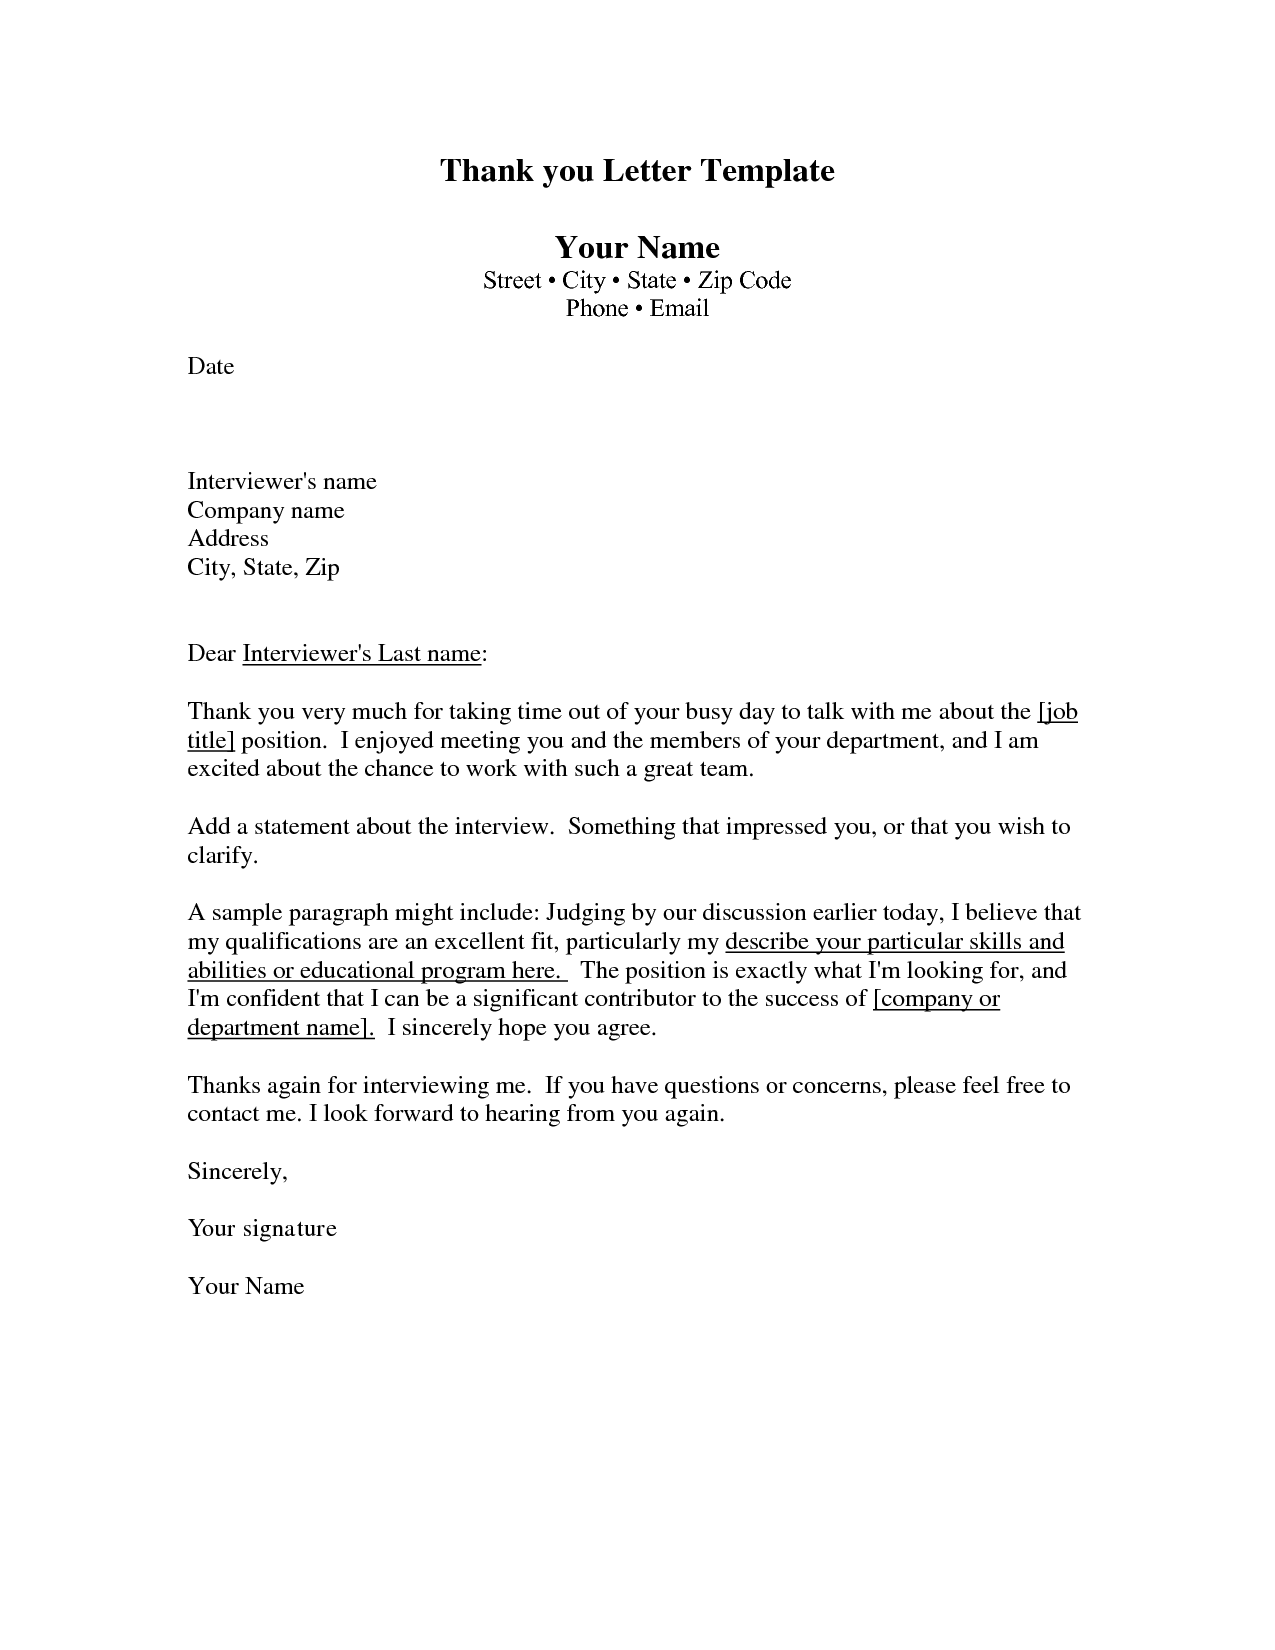 Thank You Letter Writing Template   thank you, letter, writing